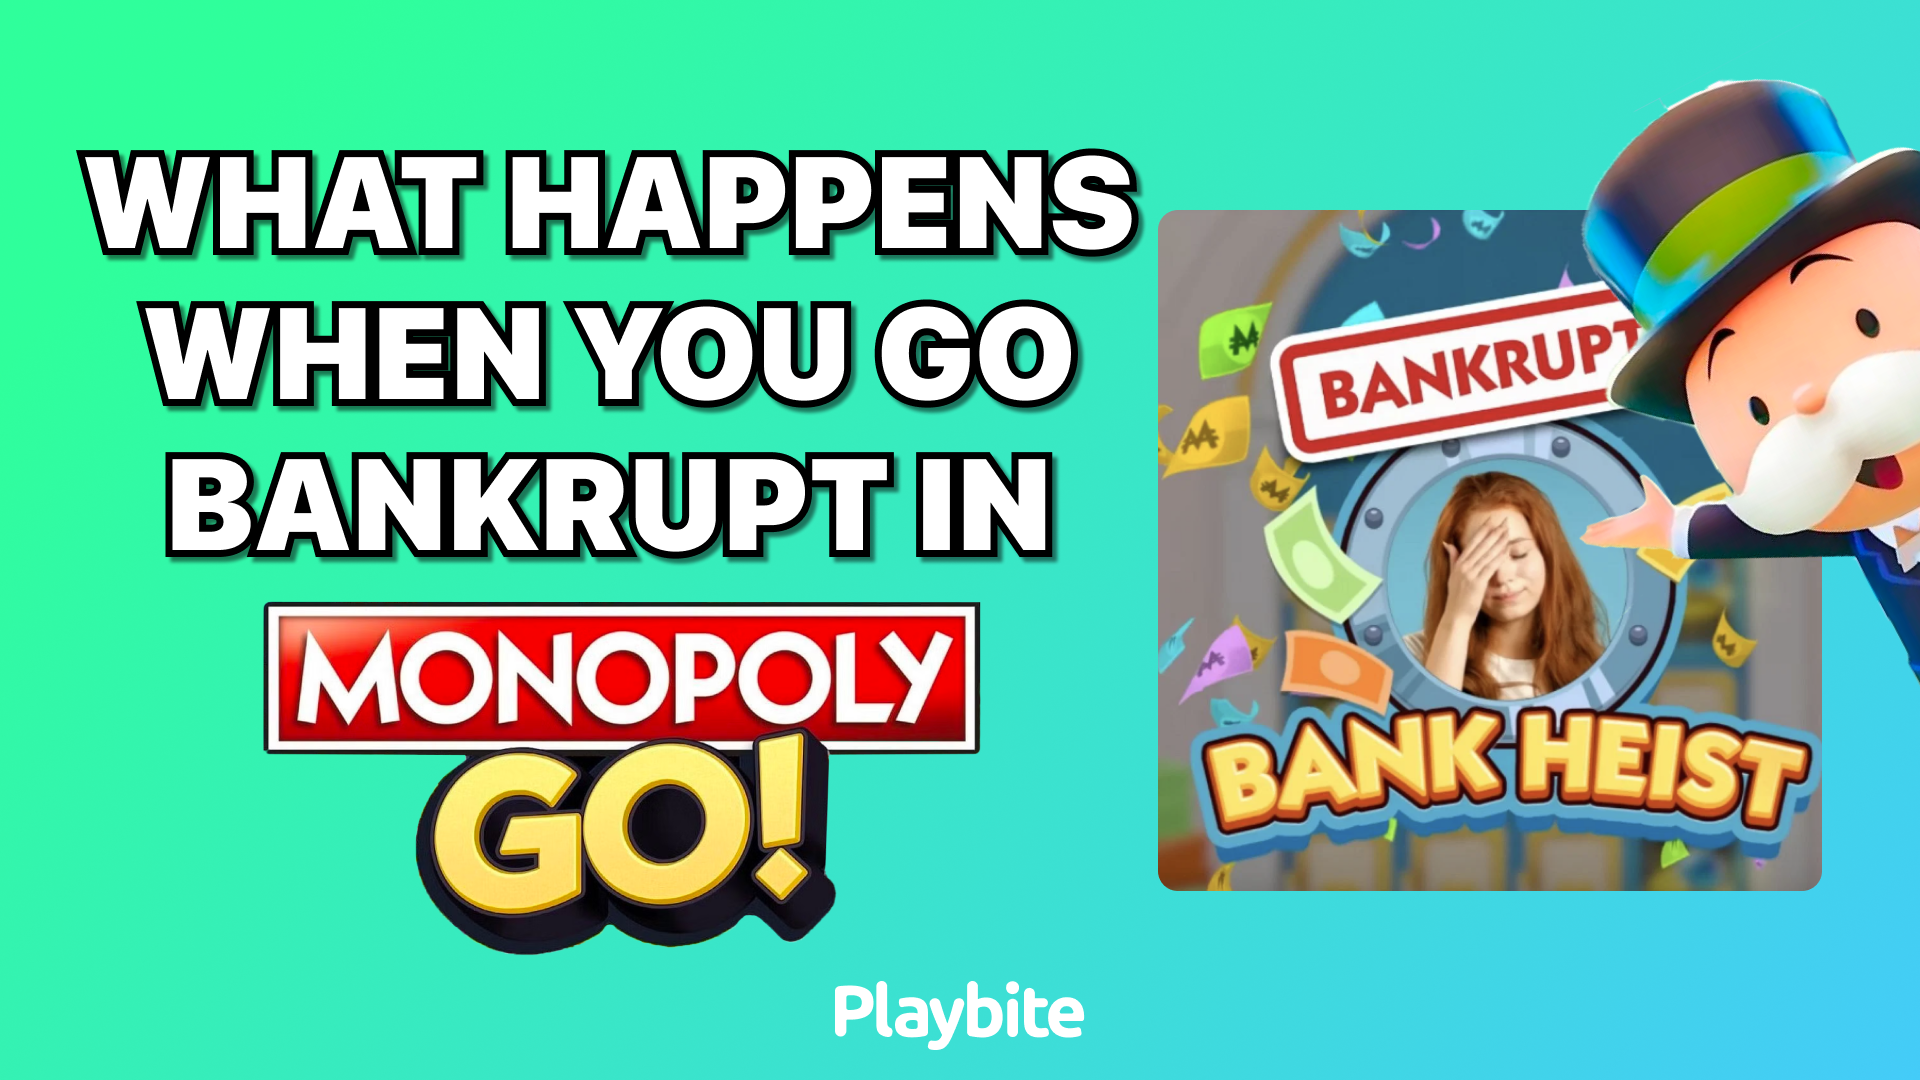 What Happens When You Go Bankrupt in Monopoly Go?